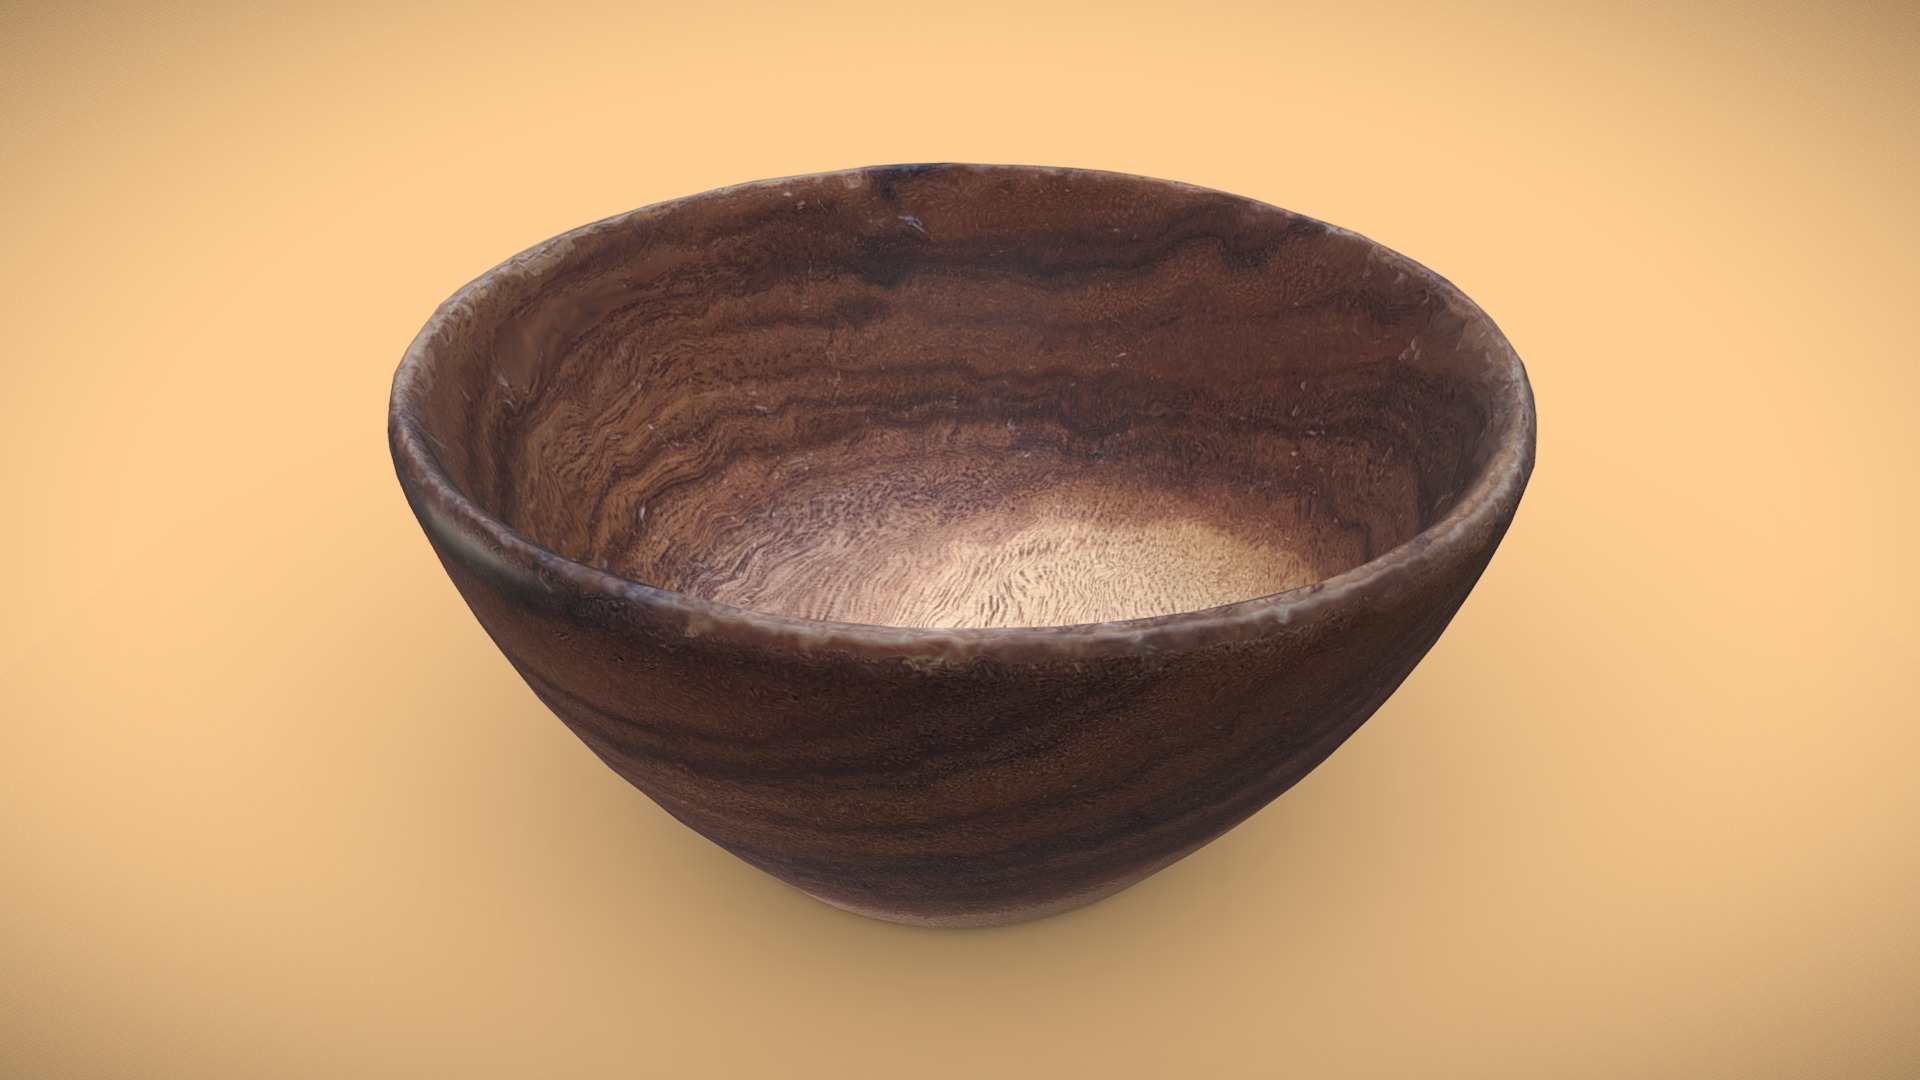 3D model Wooden Bowl – #KitchenScanChallenge - This is a 3D model of the Wooden Bowl - #KitchenScanChallenge. The 3D model is about a bowl on a surface.